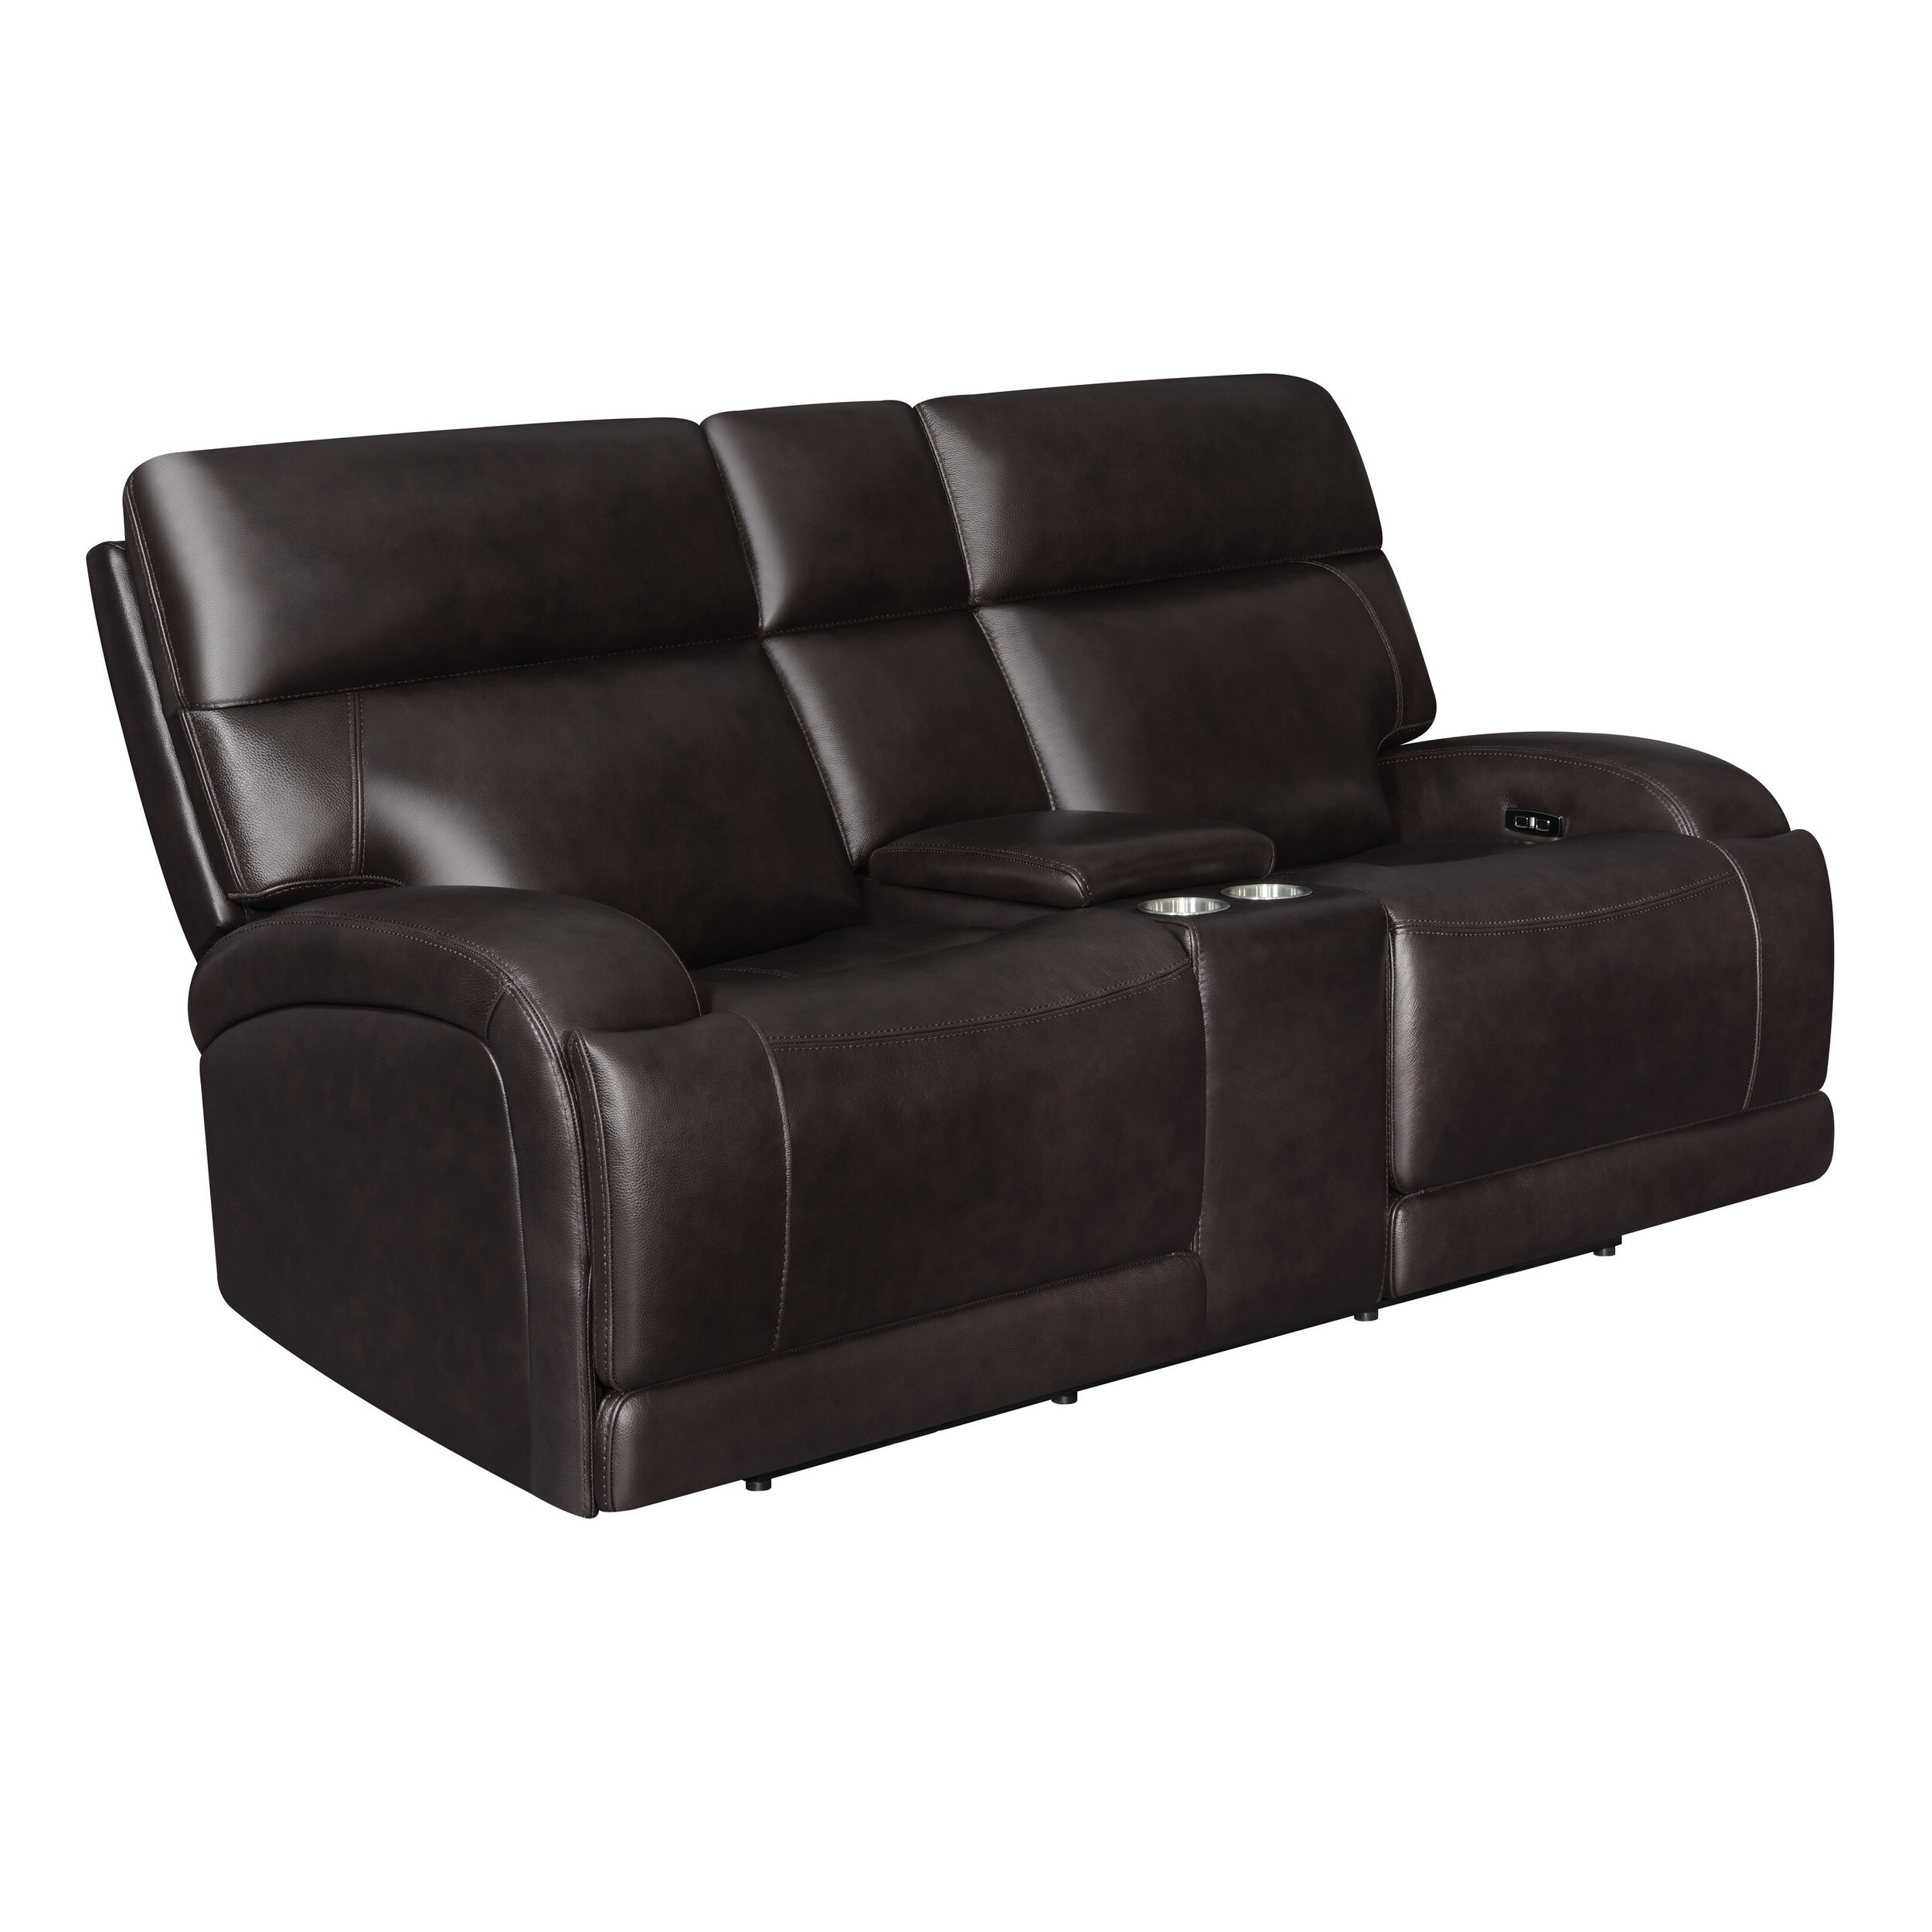 Poe 78 Inch Power Recliner Loveseat  Console  Armrests  Real Brown Leather